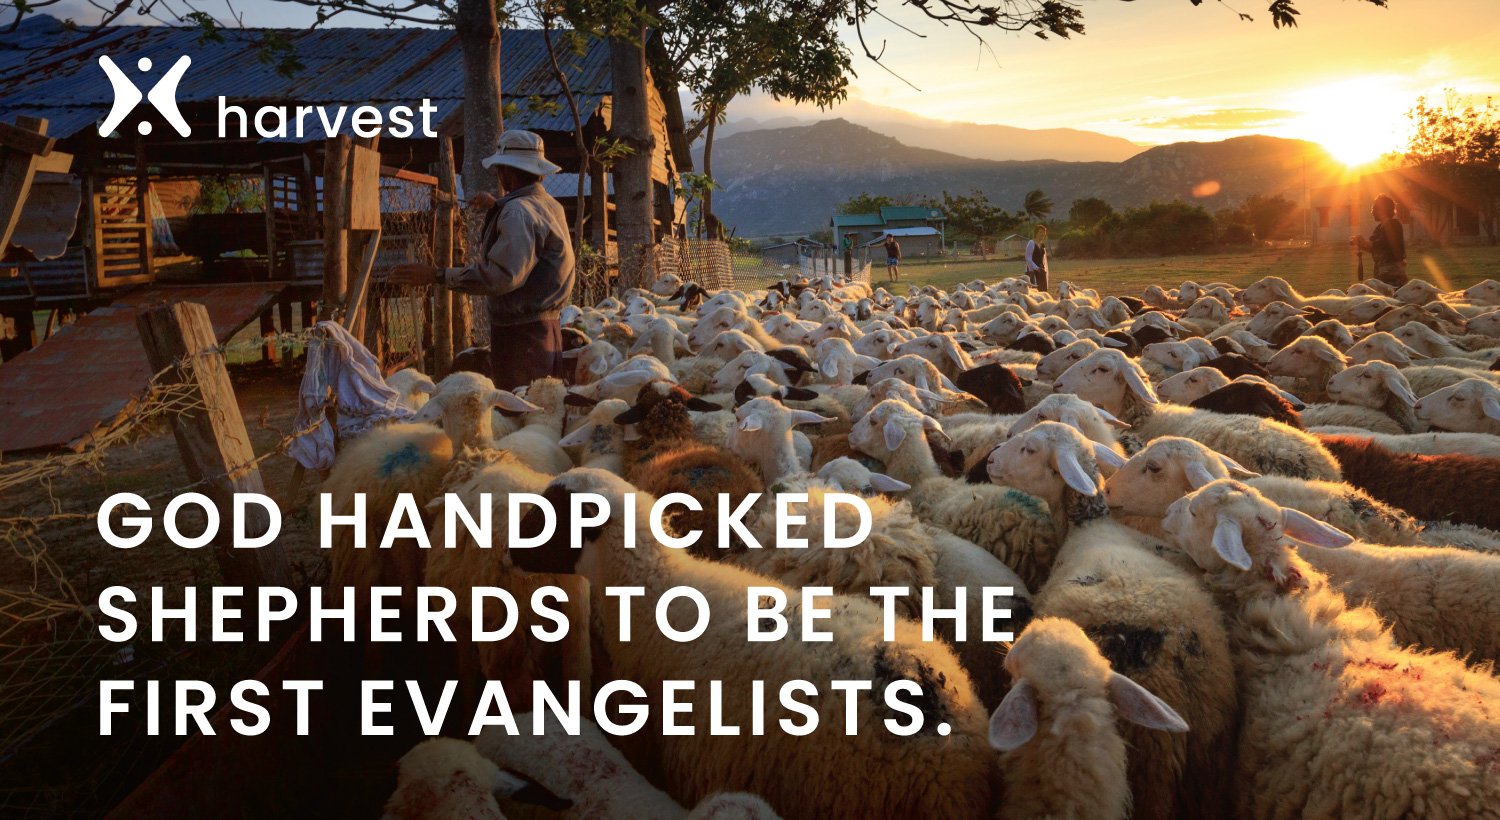 God handpicked shepherds to be the first evangelists.